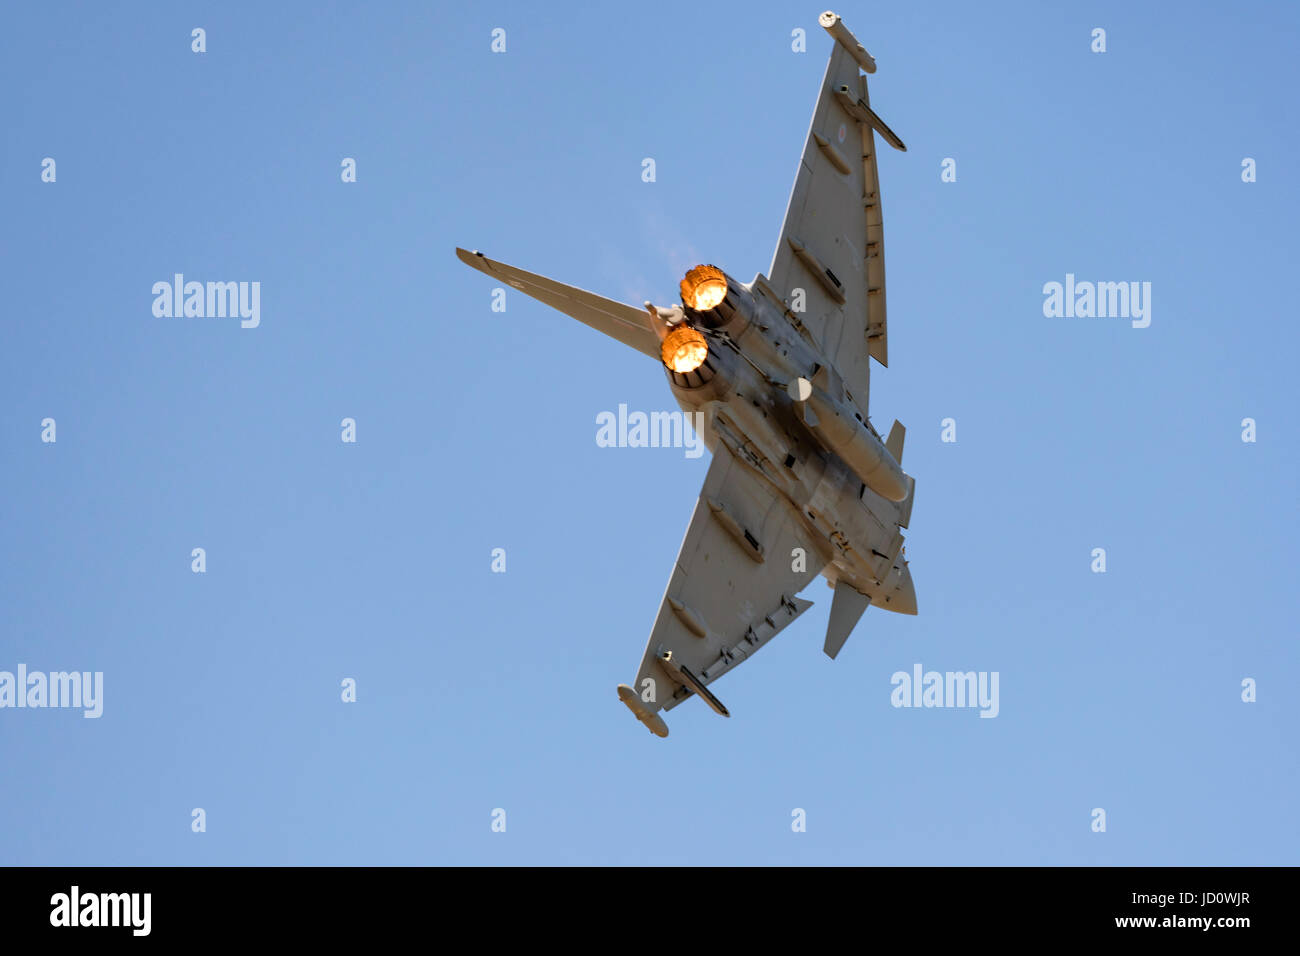 Weston-super-Mare, UK. 17th June, 2017. The RAF Typhoon Display Team lighting up the burners on their display routine in blue skies, on a summer day in Weston-super-Mare, UK. Credit: Bob Sharples/Alamy Live News Stock Photo